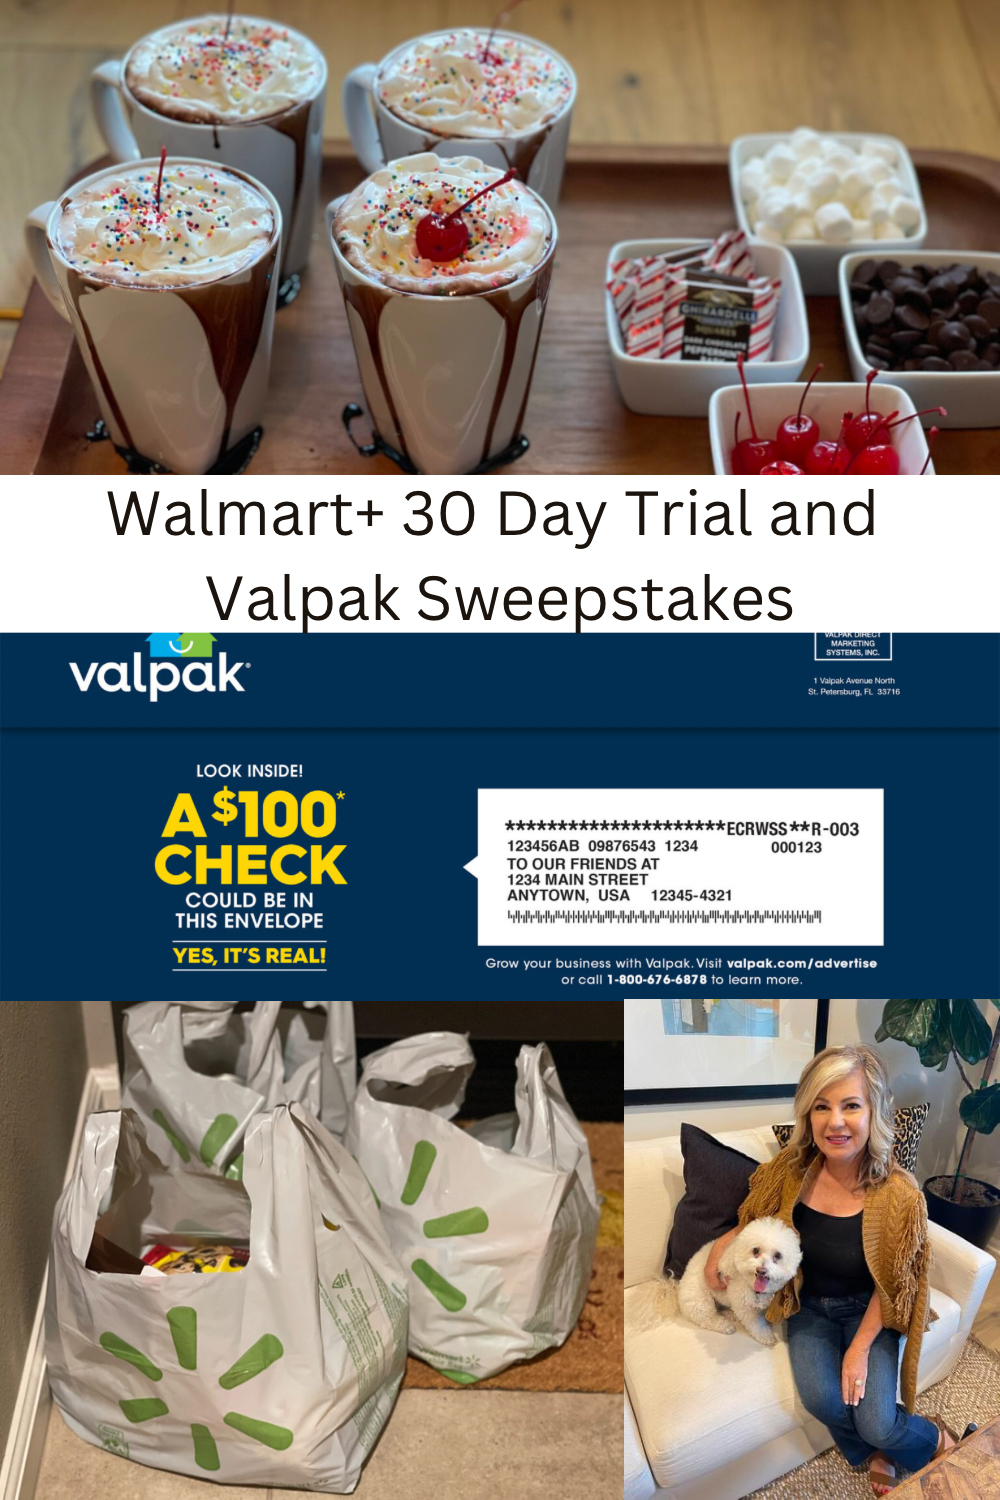 Walmart+ 30 Day Free Trial and Valpak Sweepstakes